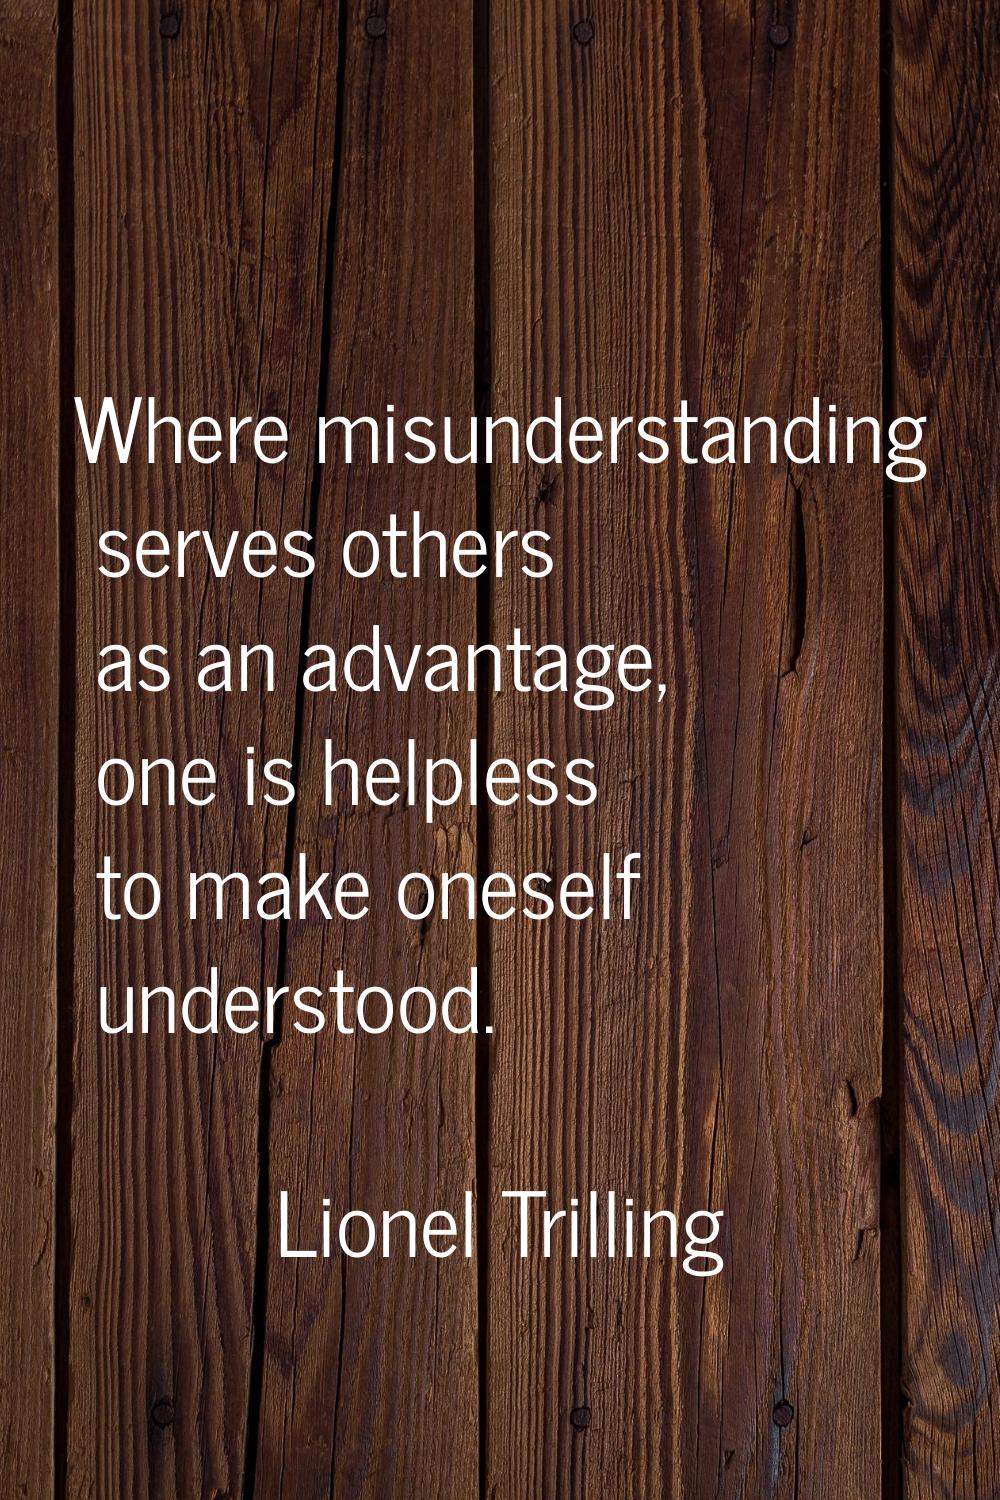 Where misunderstanding serves others as an advantage, one is helpless to make oneself understood.